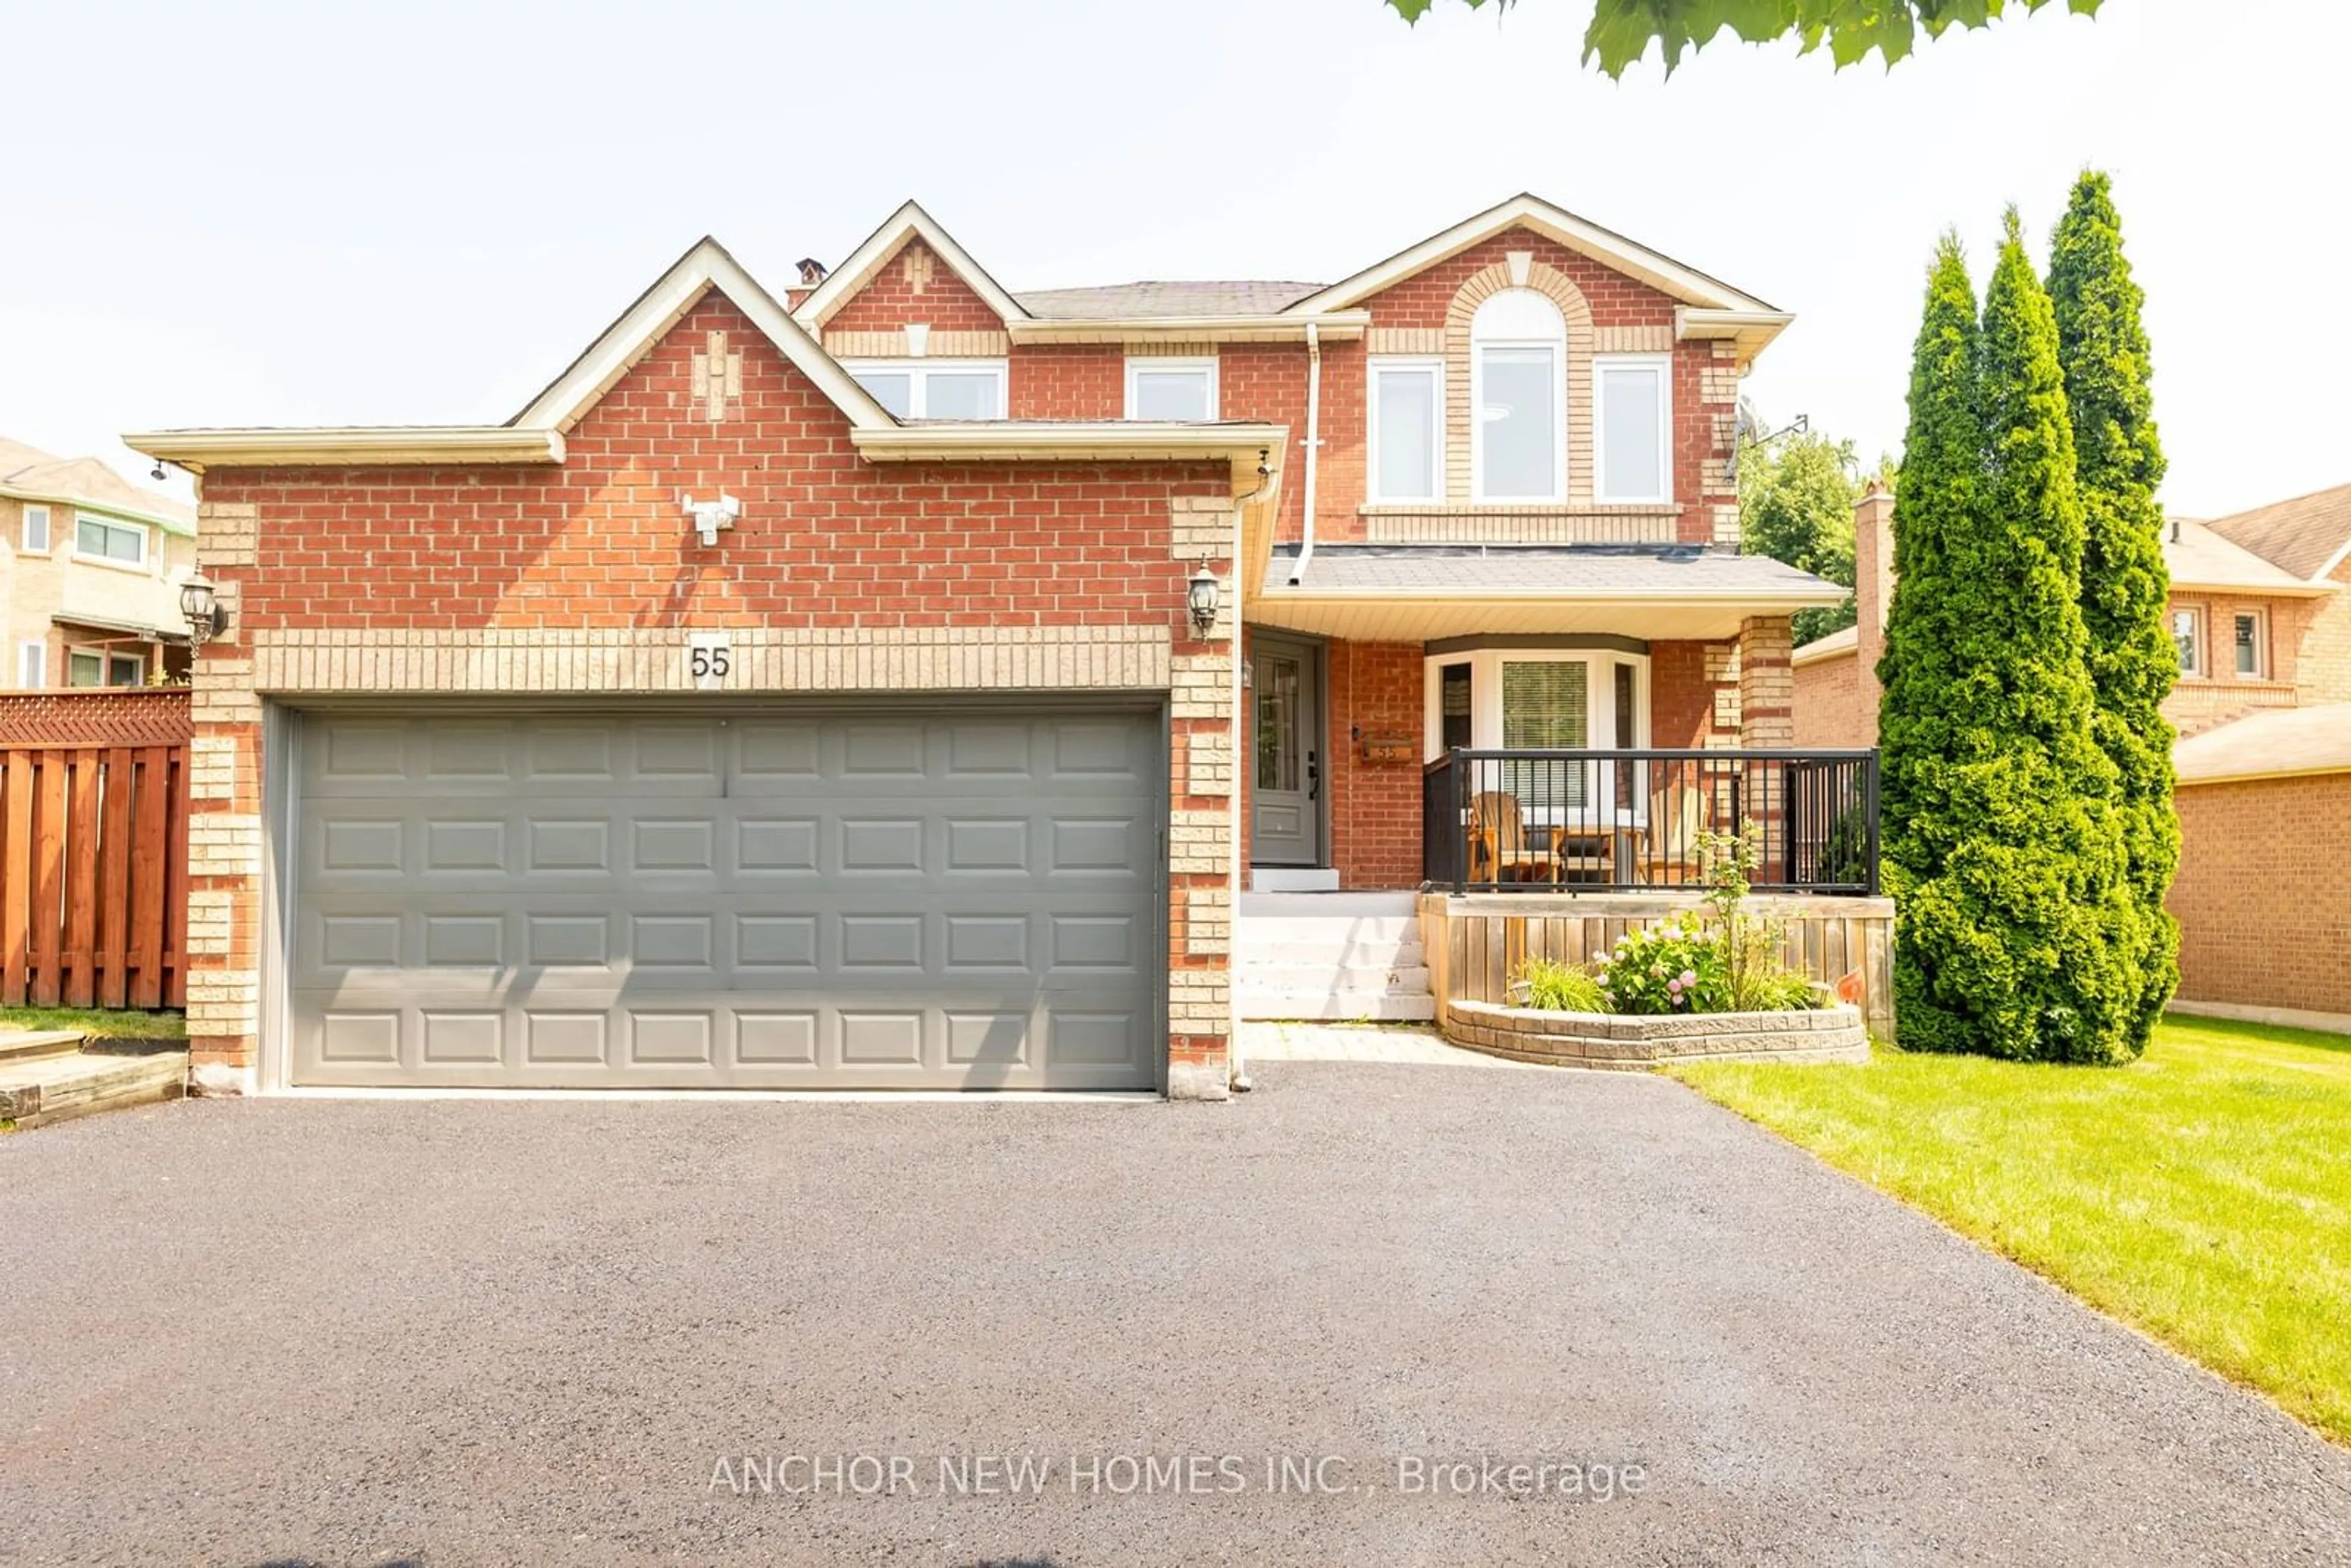 Home with brick exterior material for 55 Meekings Dr, Ajax Ontario L1T 3N2